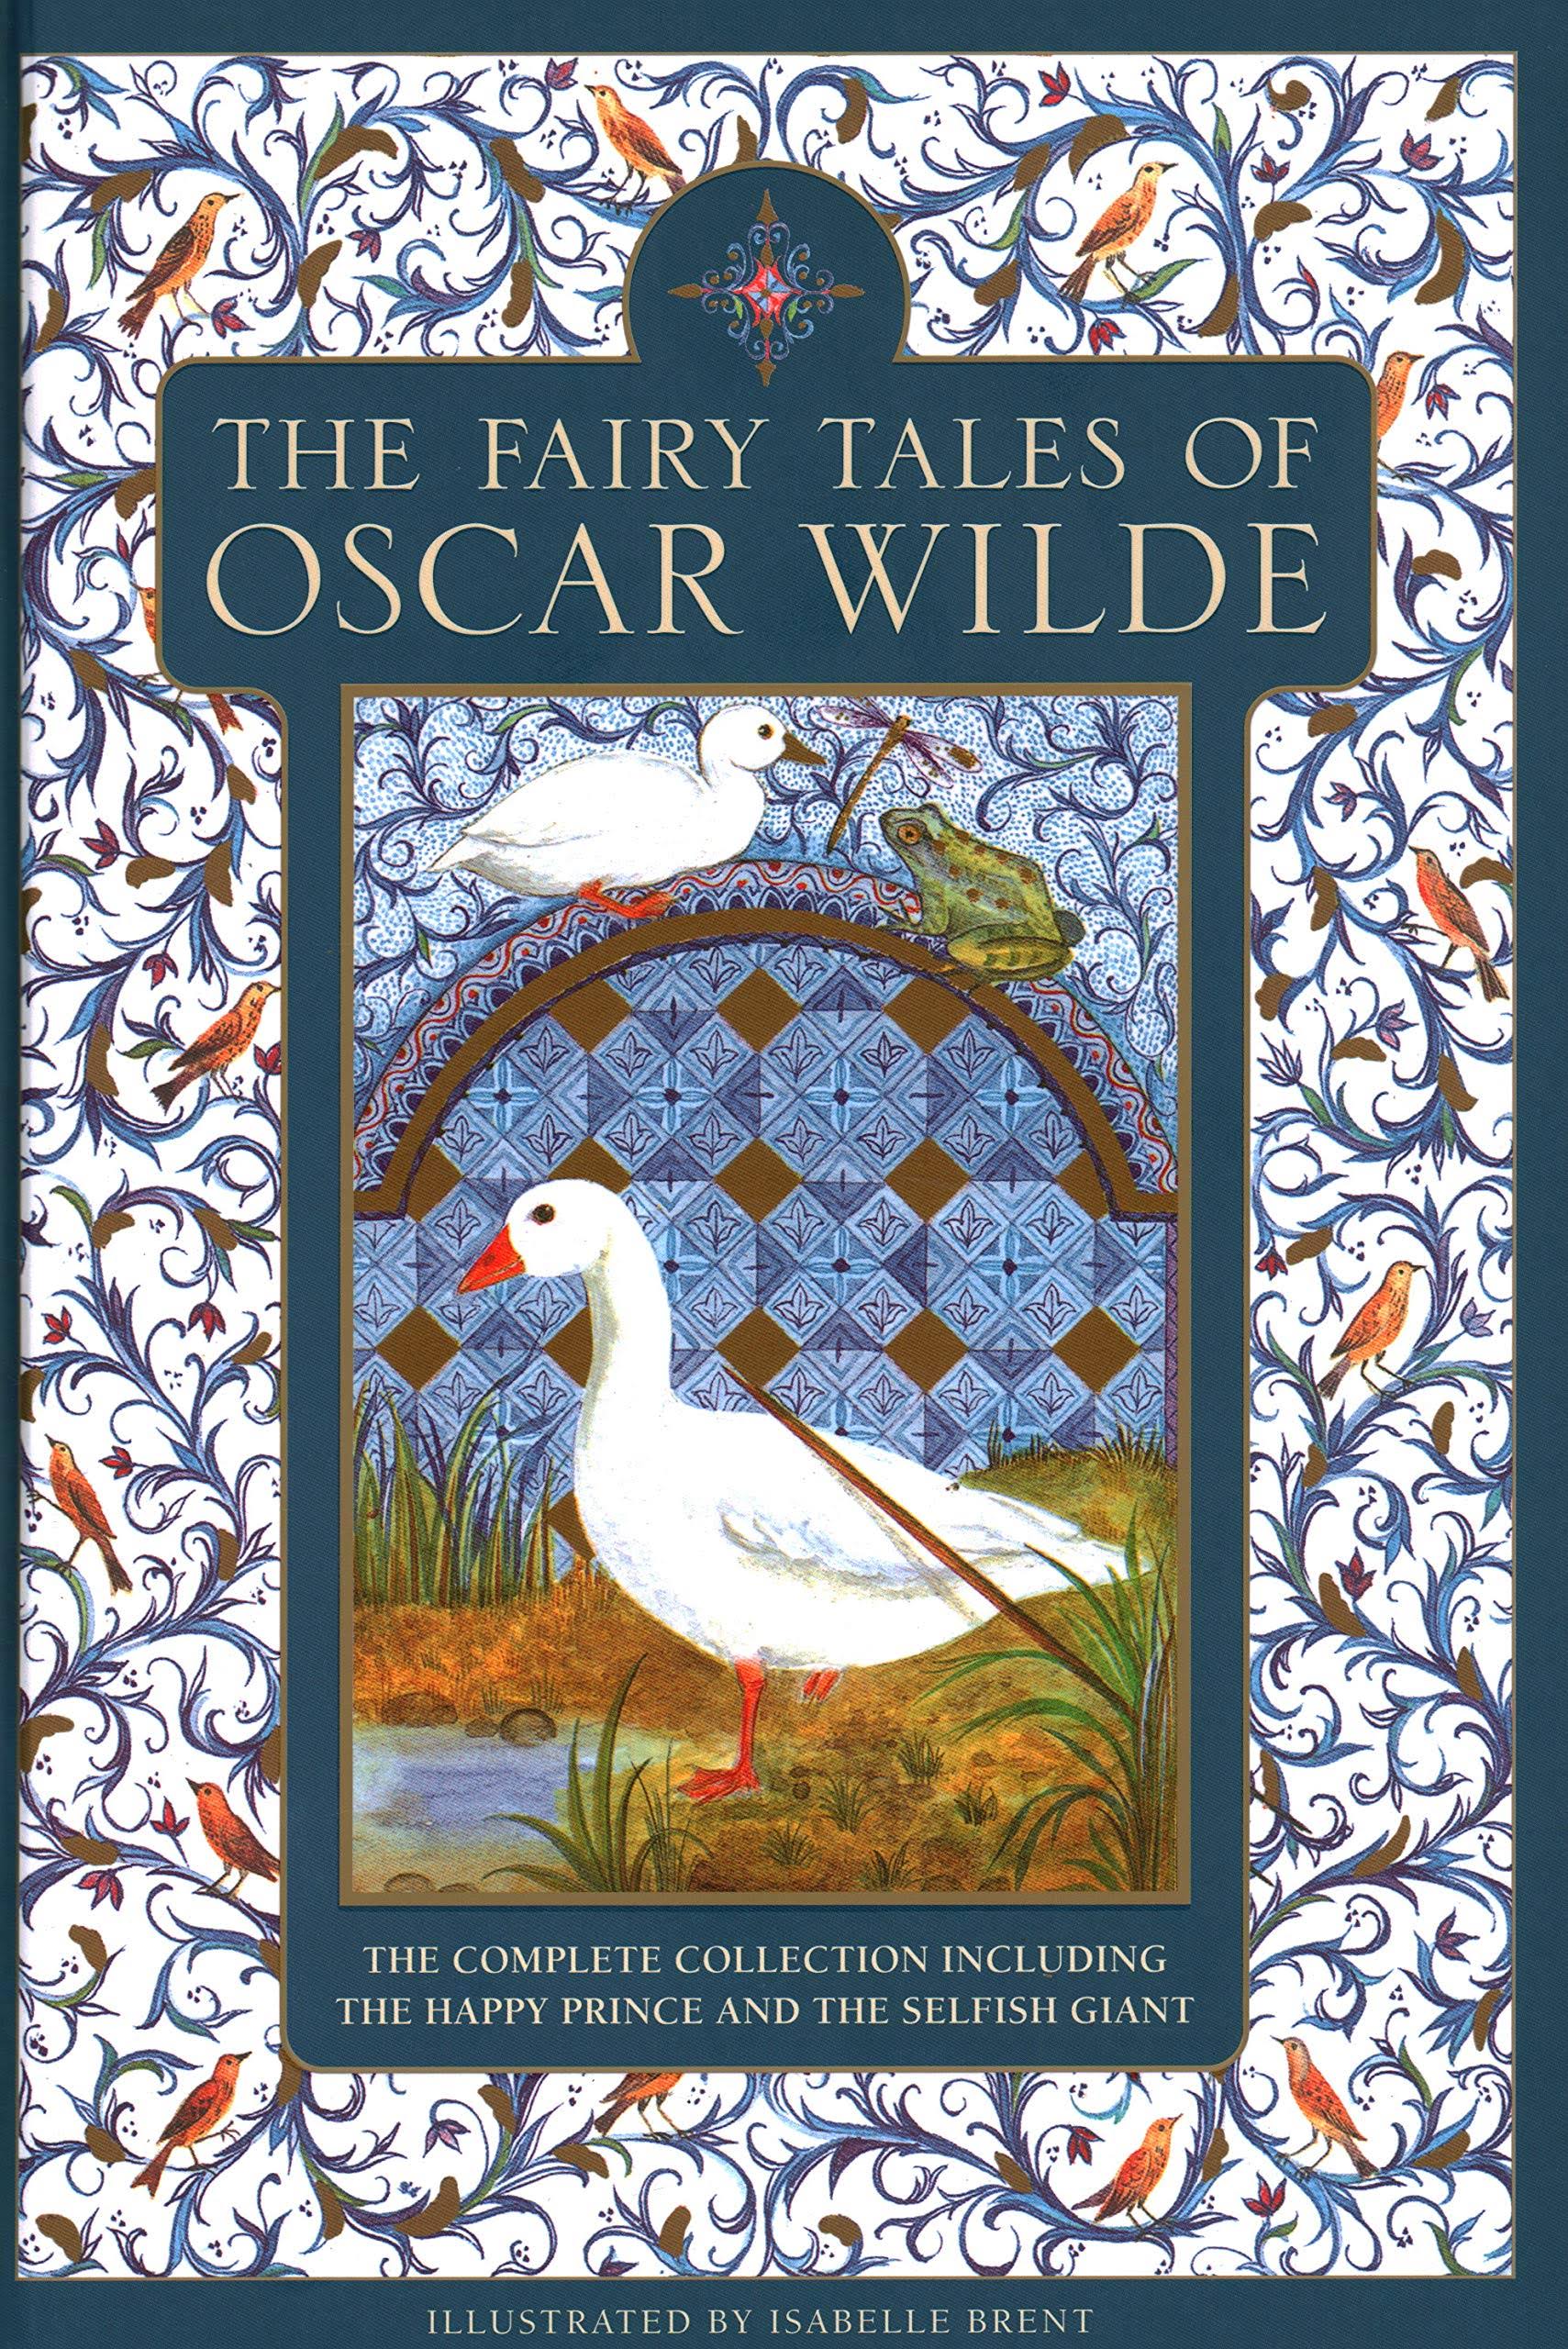 Fairy Tales of Oscar Wilde, The: The Complete Collection Including The Happy Prince and The Selfish Giant